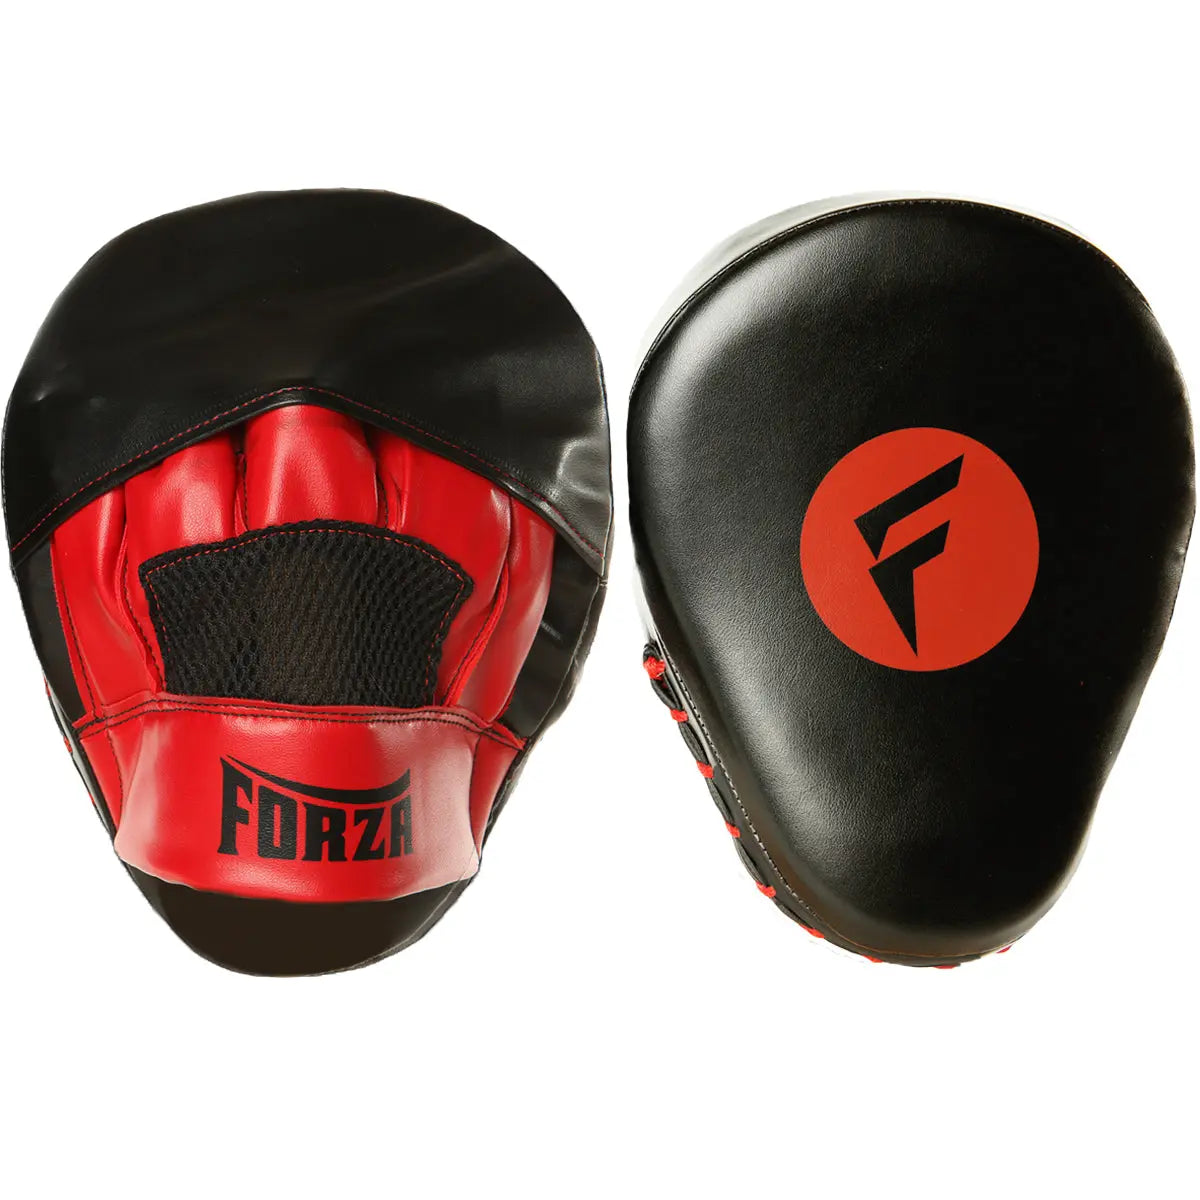 Forza Sports Vinyl Boxing and MMA Focus Mitts - Black/Red Forza Sports